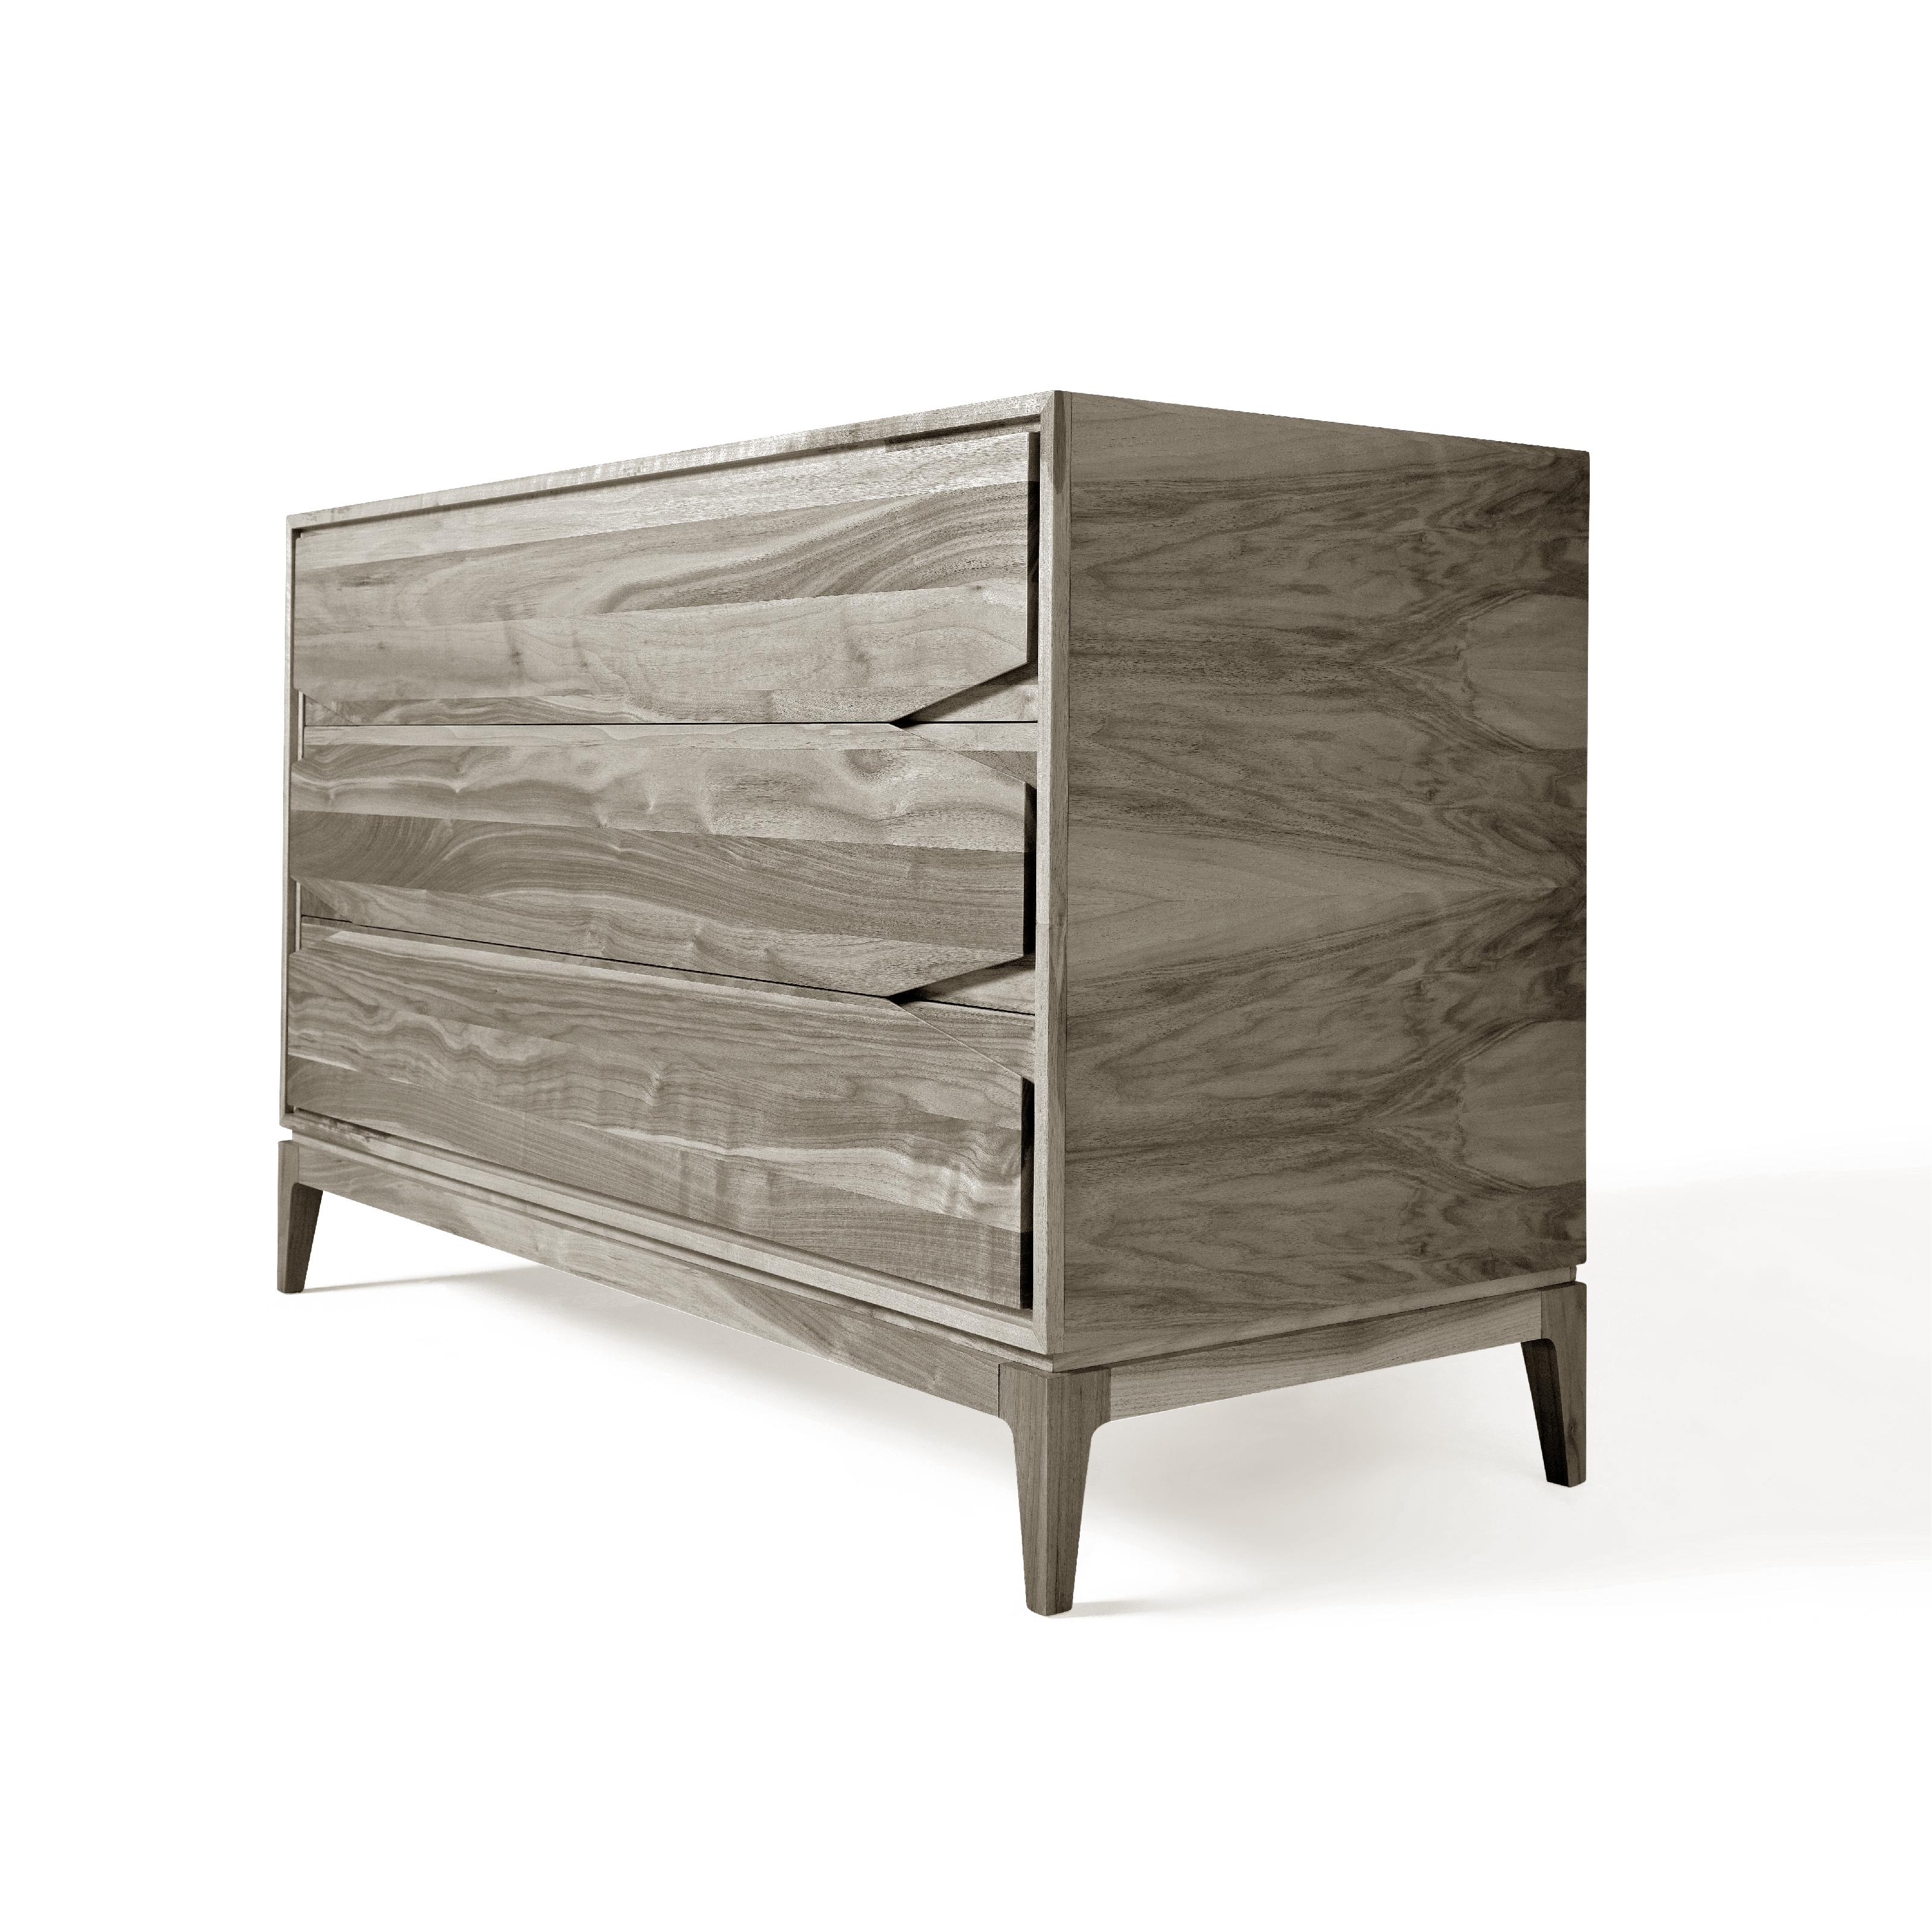 The Base solid wood dresser is made in Italy by expert hands with top quality solid walnut. Its linear simplicity makes it suitable for any contemporary interior, while the robust design guarantee maximum durability.